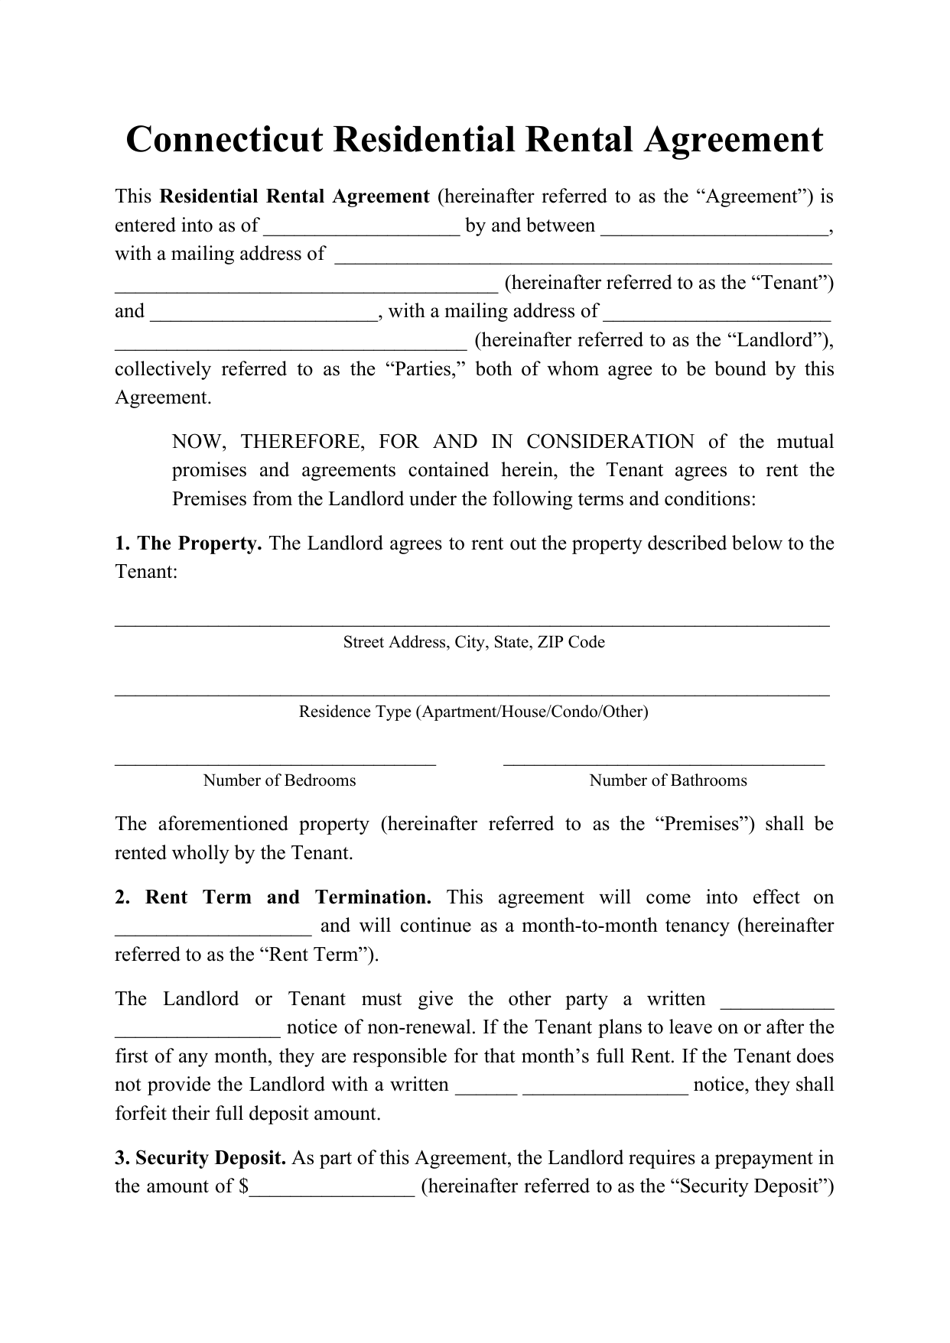 Connecticut Residential Rental Agreement Template Download Printable